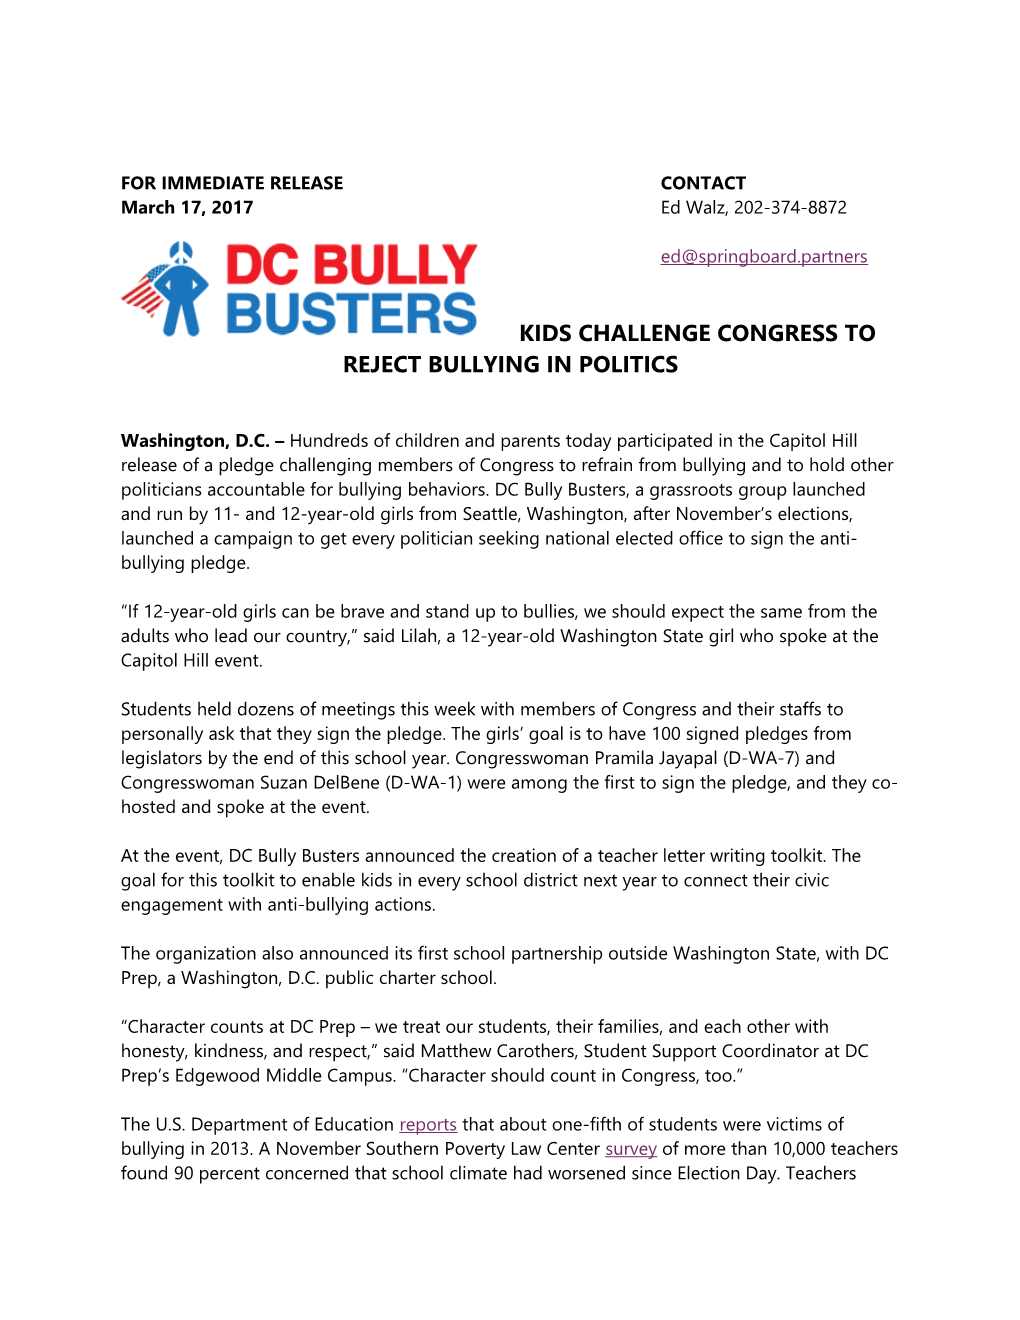 Kids Challenge Congress to Reject Bullying in Politics